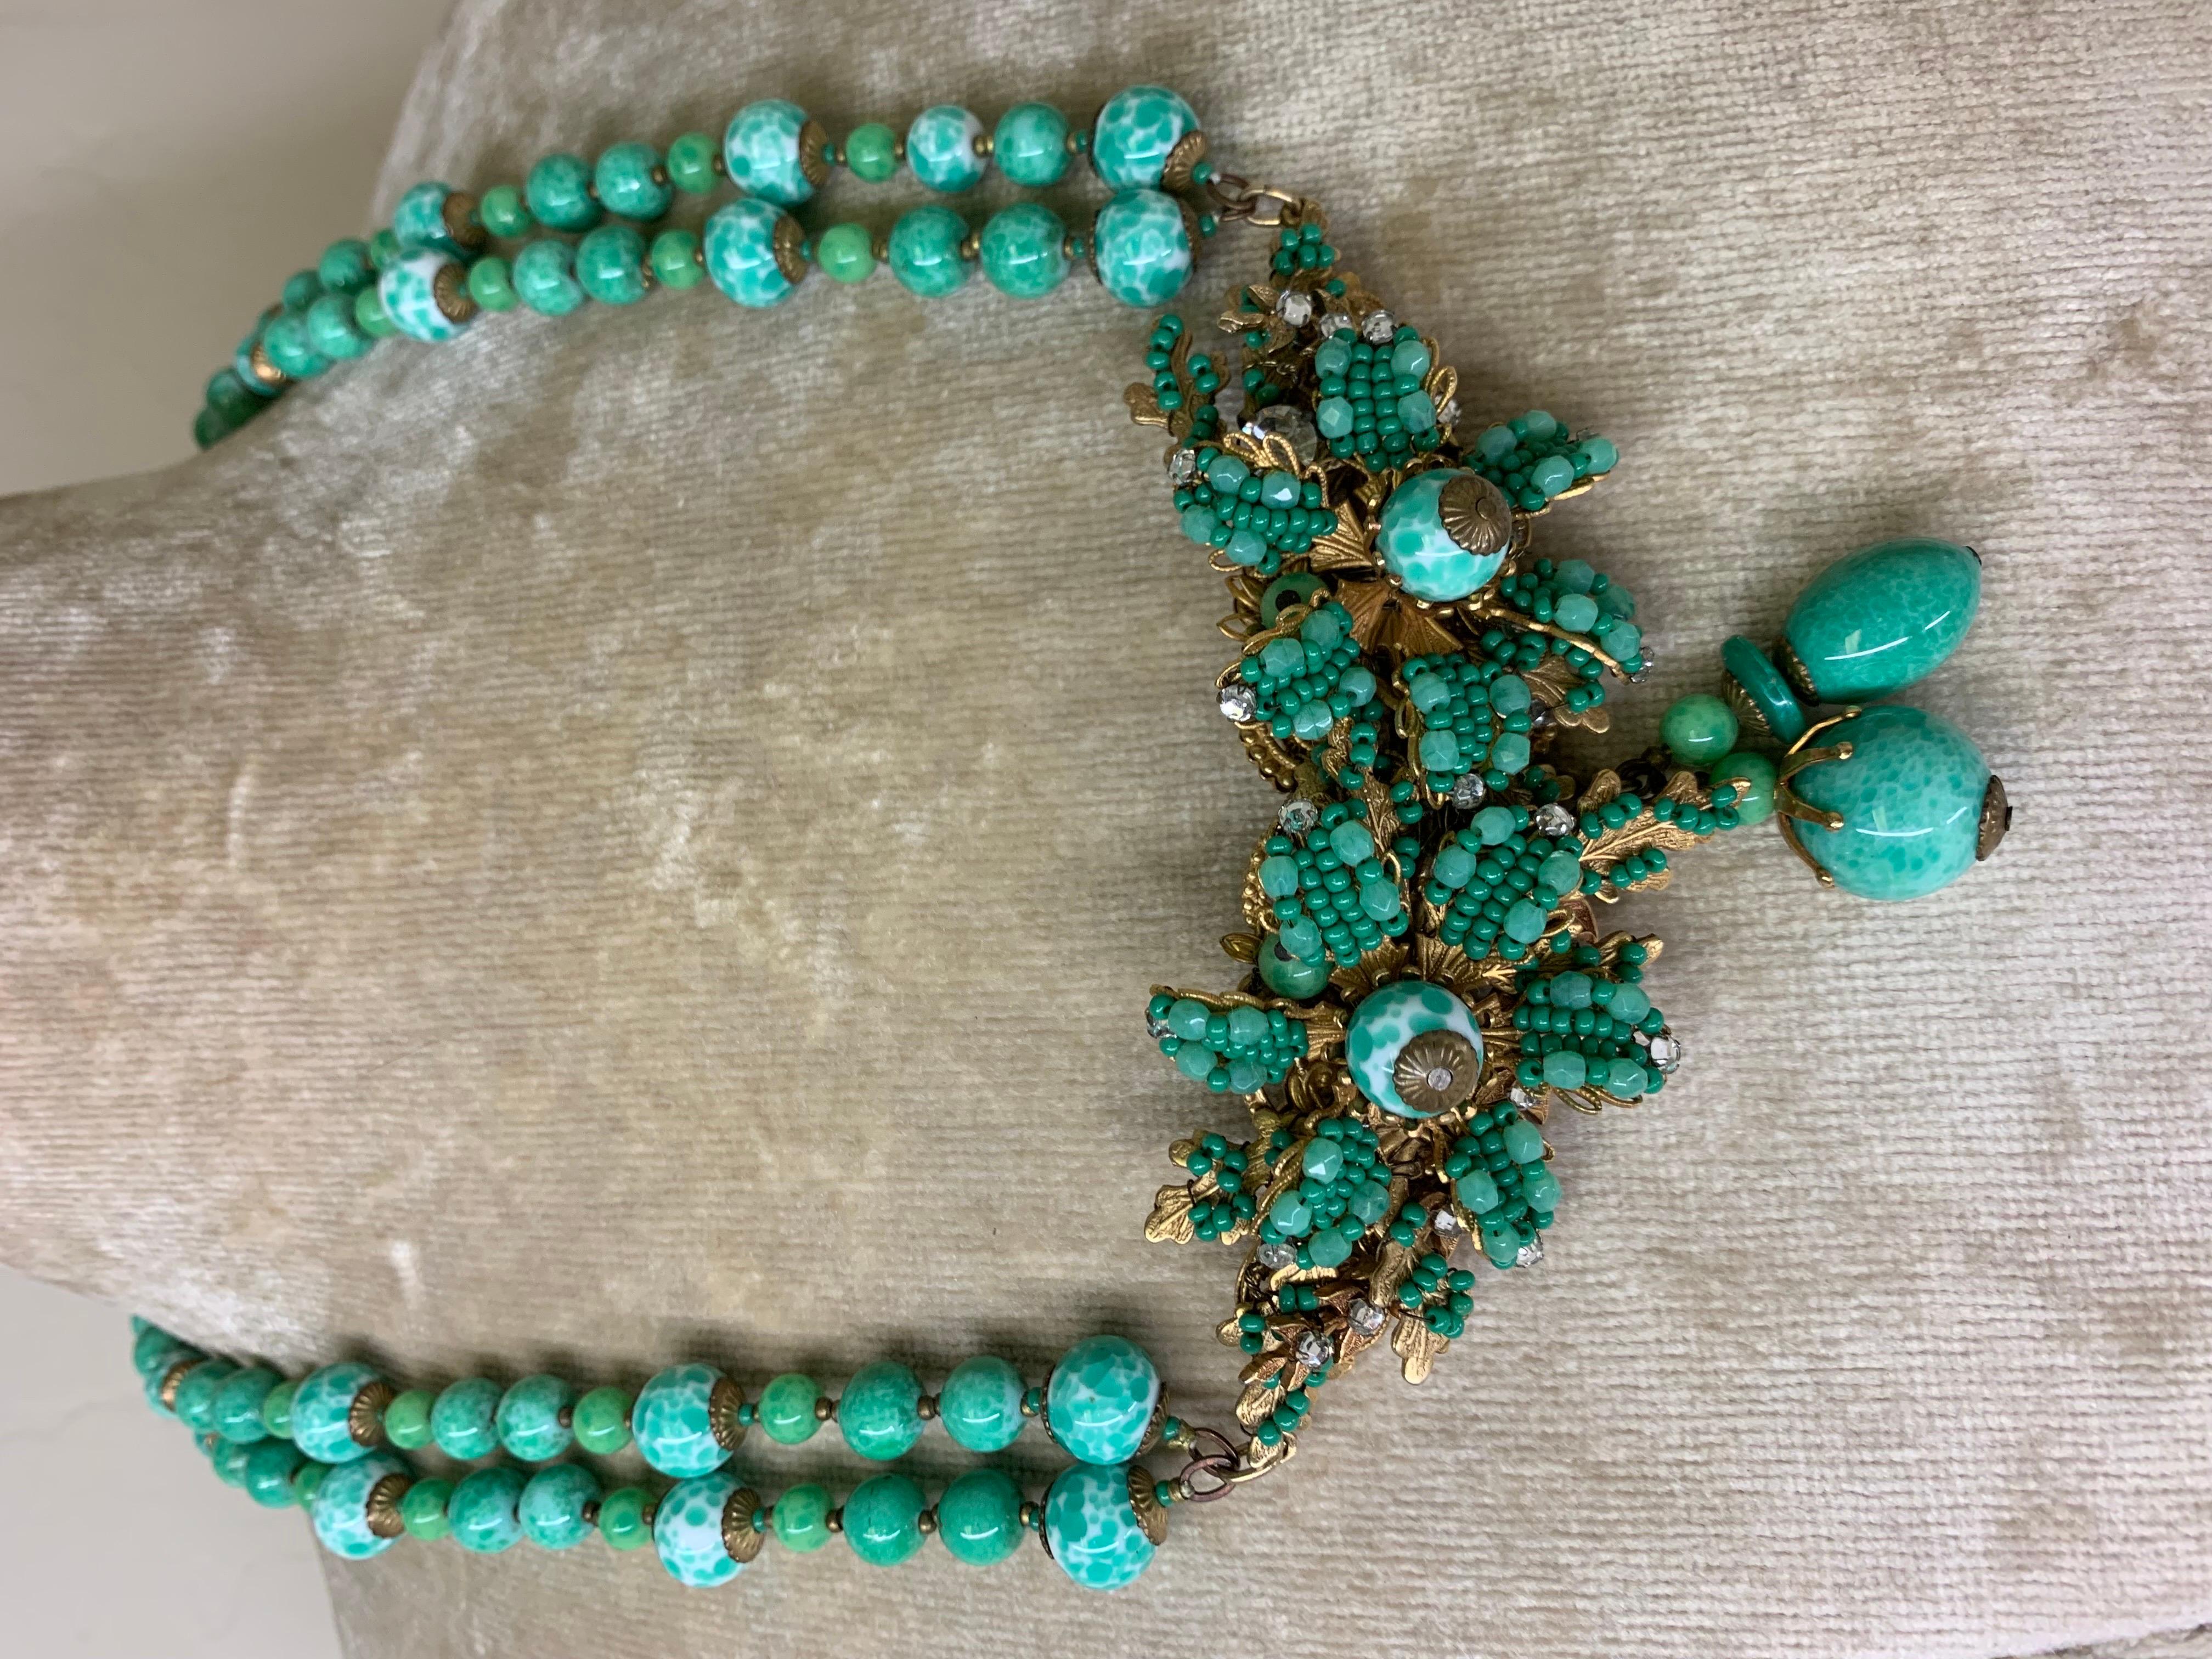 1940s Miriam Haskell Double Strand Jade Green Glass Necklace w Center Flower: Approximately 24